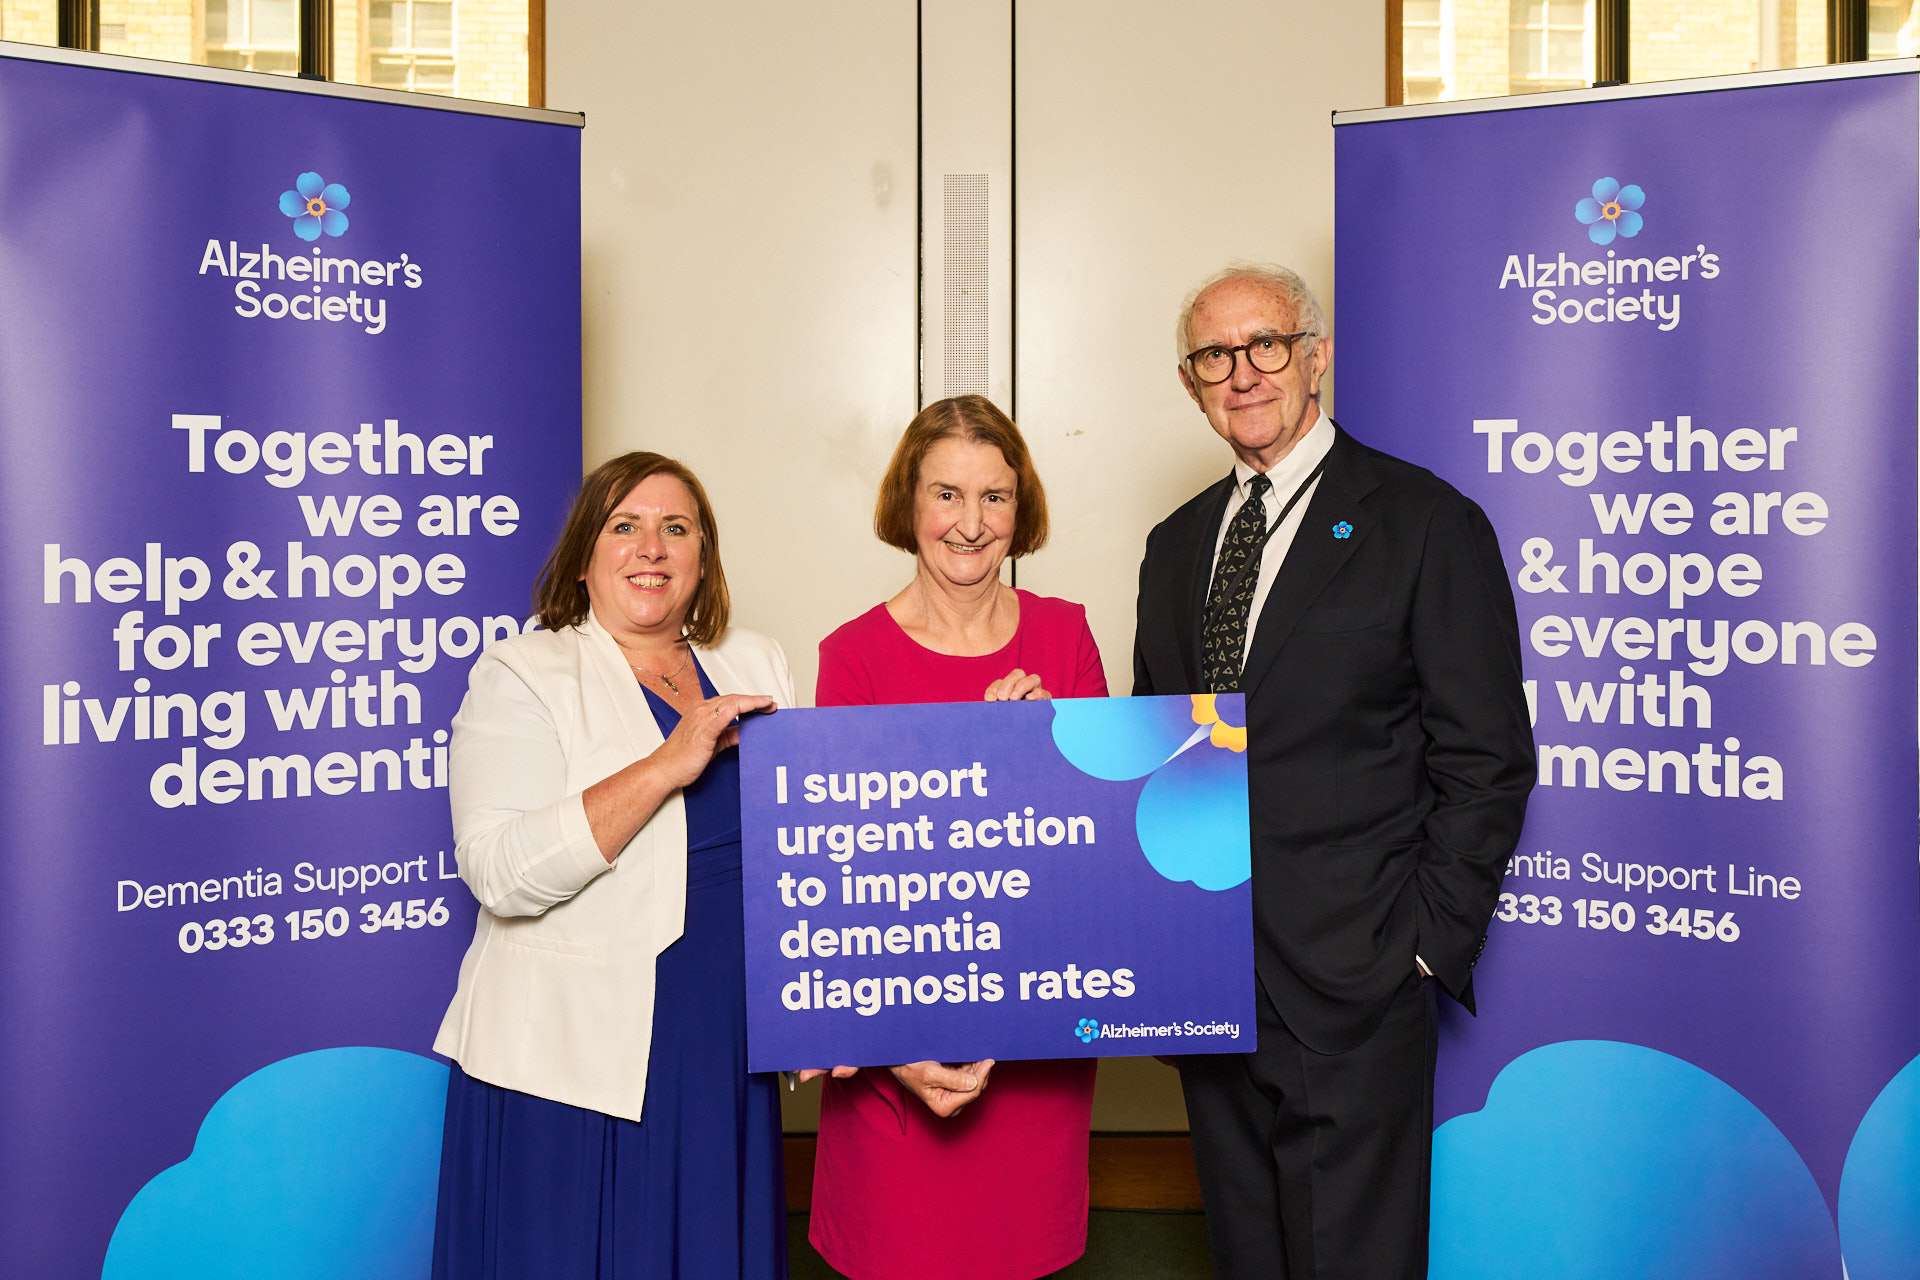 Dame Nia Griffith MP supports Alzheimer’s Society during Dementia Action Week